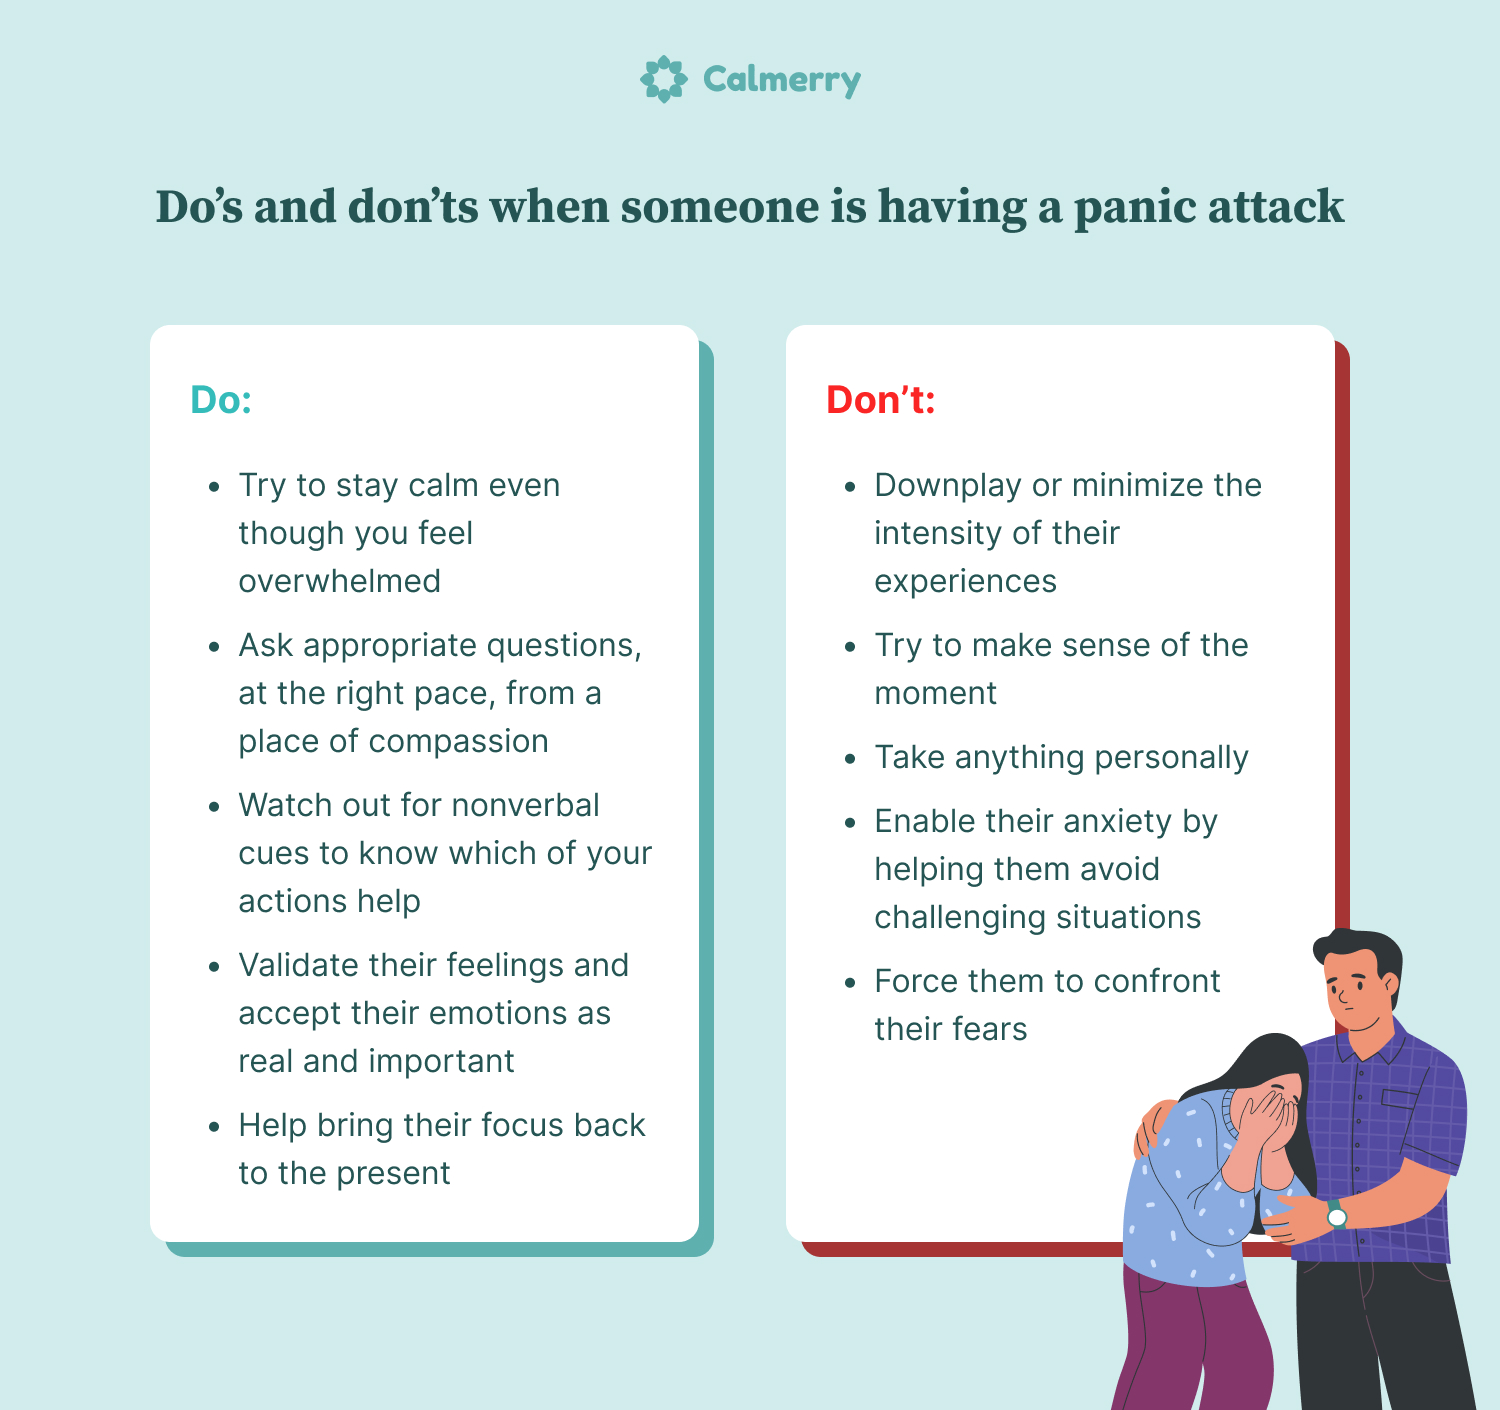 Do’s and don’ts when someone is having a panic attack Do:  Try to stay calm even though you feel overwhelmed Ask appropriate questions, at the right pace, from a place of compassion  Watch out for nonverbal cues to know which of your actions help Validate their feelings and accept their emotions as real and important Help bring their focus back to the present  Don’t: Downplay or minimize the intensity of their experiences  Try to make sense of the moment Take anything personally Enable their anxiety by helping them avoid challenging situations Force them to confront their fears